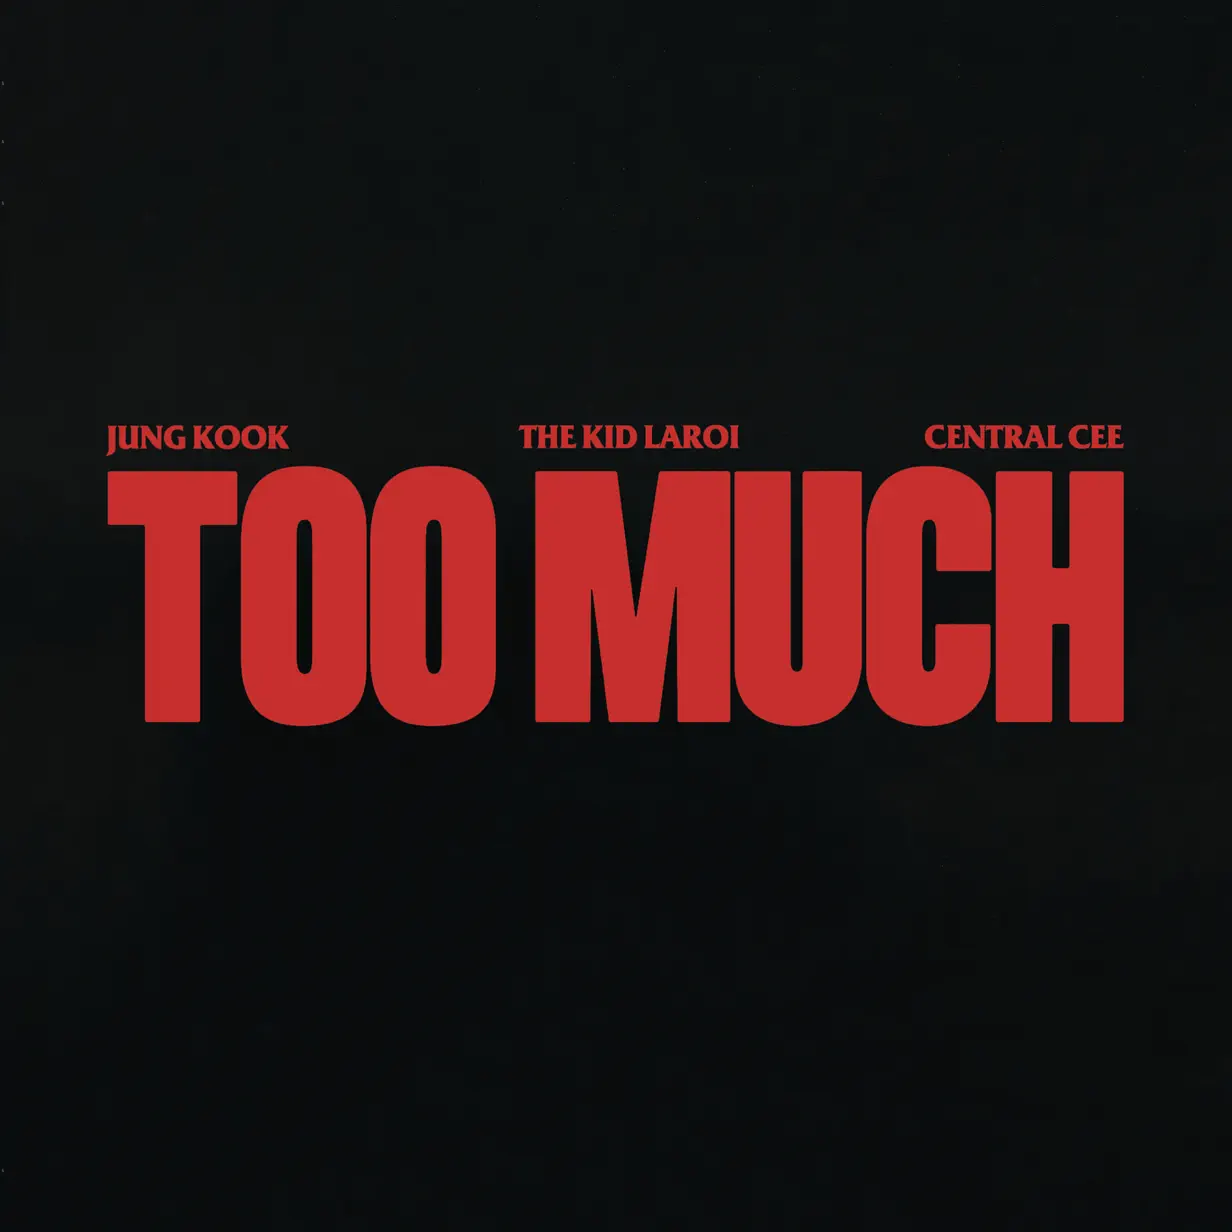 The Kid Laroi’s “Too Much” feat. Jungkook & Central Cee Download MP3